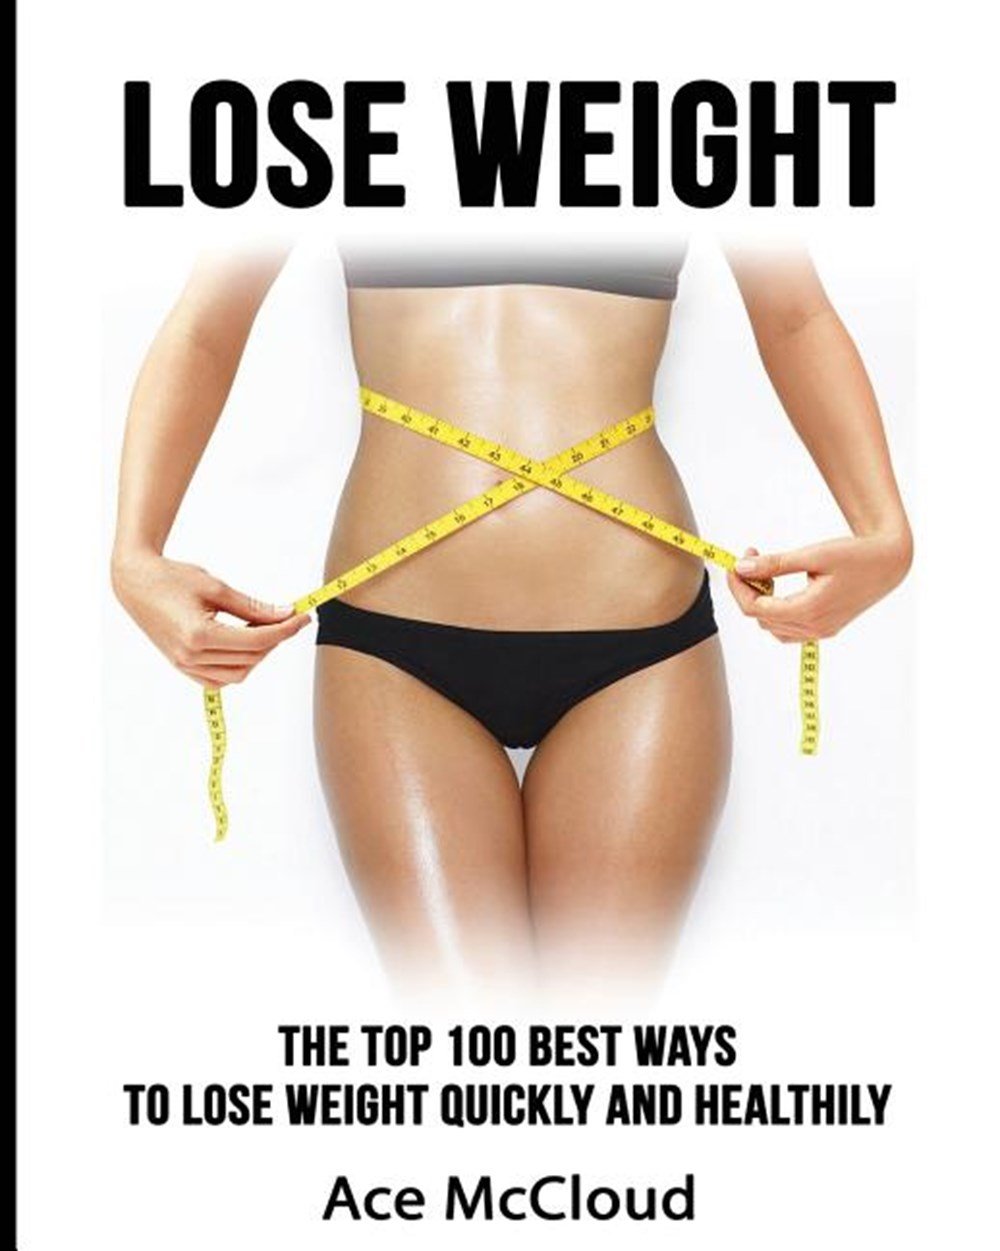 Lose Weight The Top 100 Best Ways To Lose Weight Quickly and Healthily